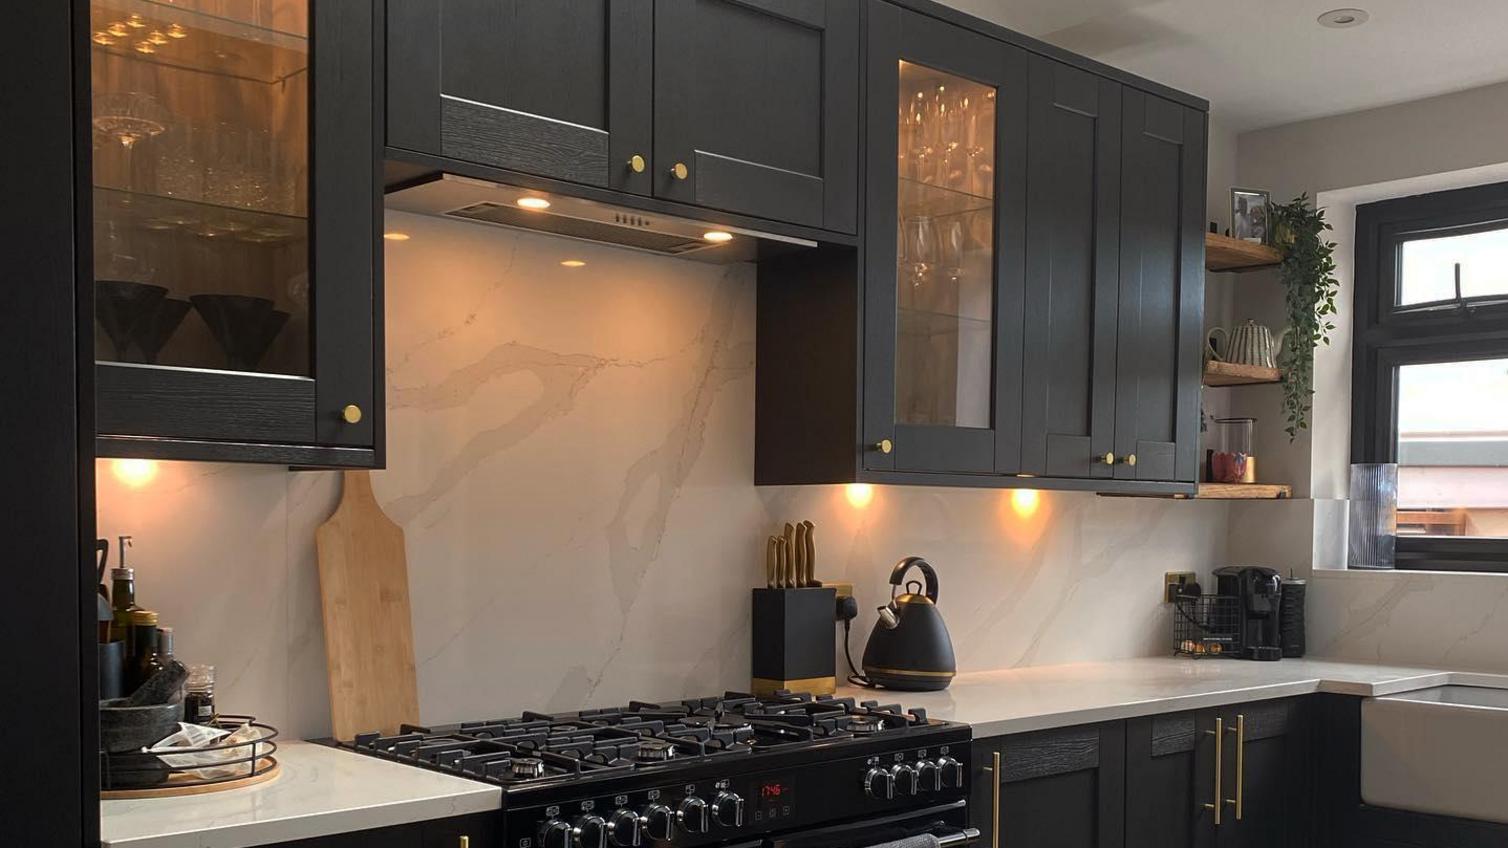 Black shaker style kitchen with glass dresser units, a black range cooker, white marble worktops.